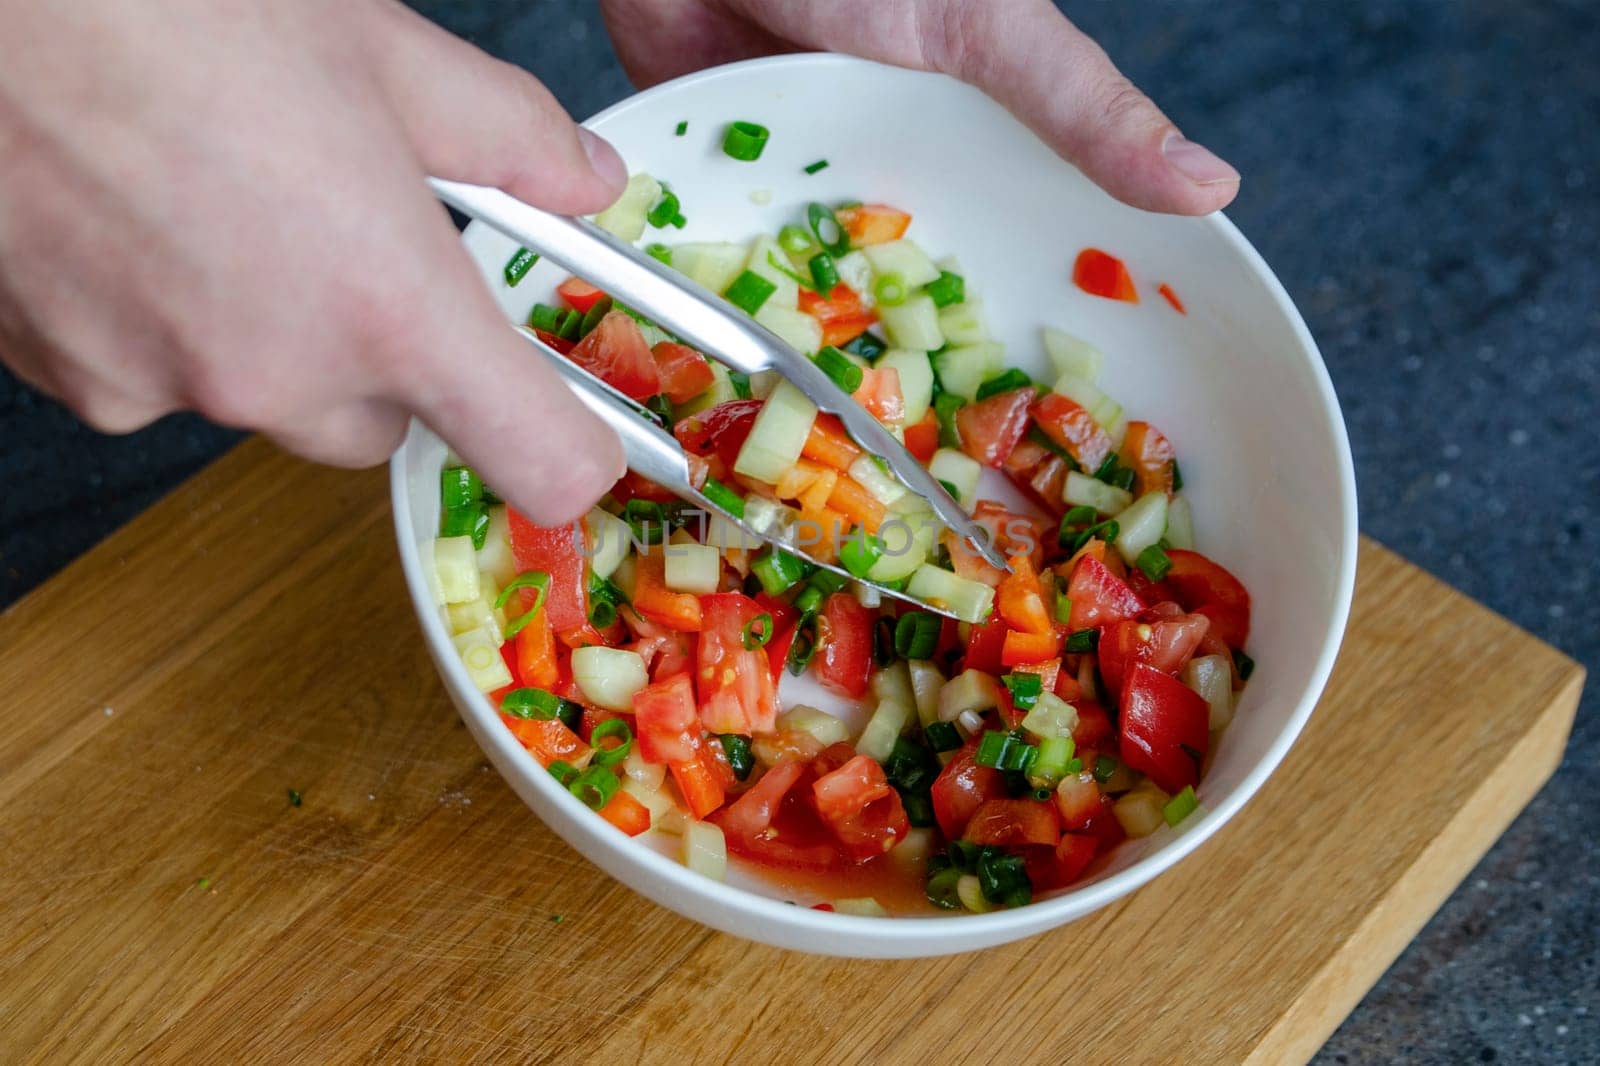 The process of mixing salad. Close-up of a man's hands stirring a salad mixture. Hands stir the salad so that the ingredients are distributed throughout the plate. High quality photo